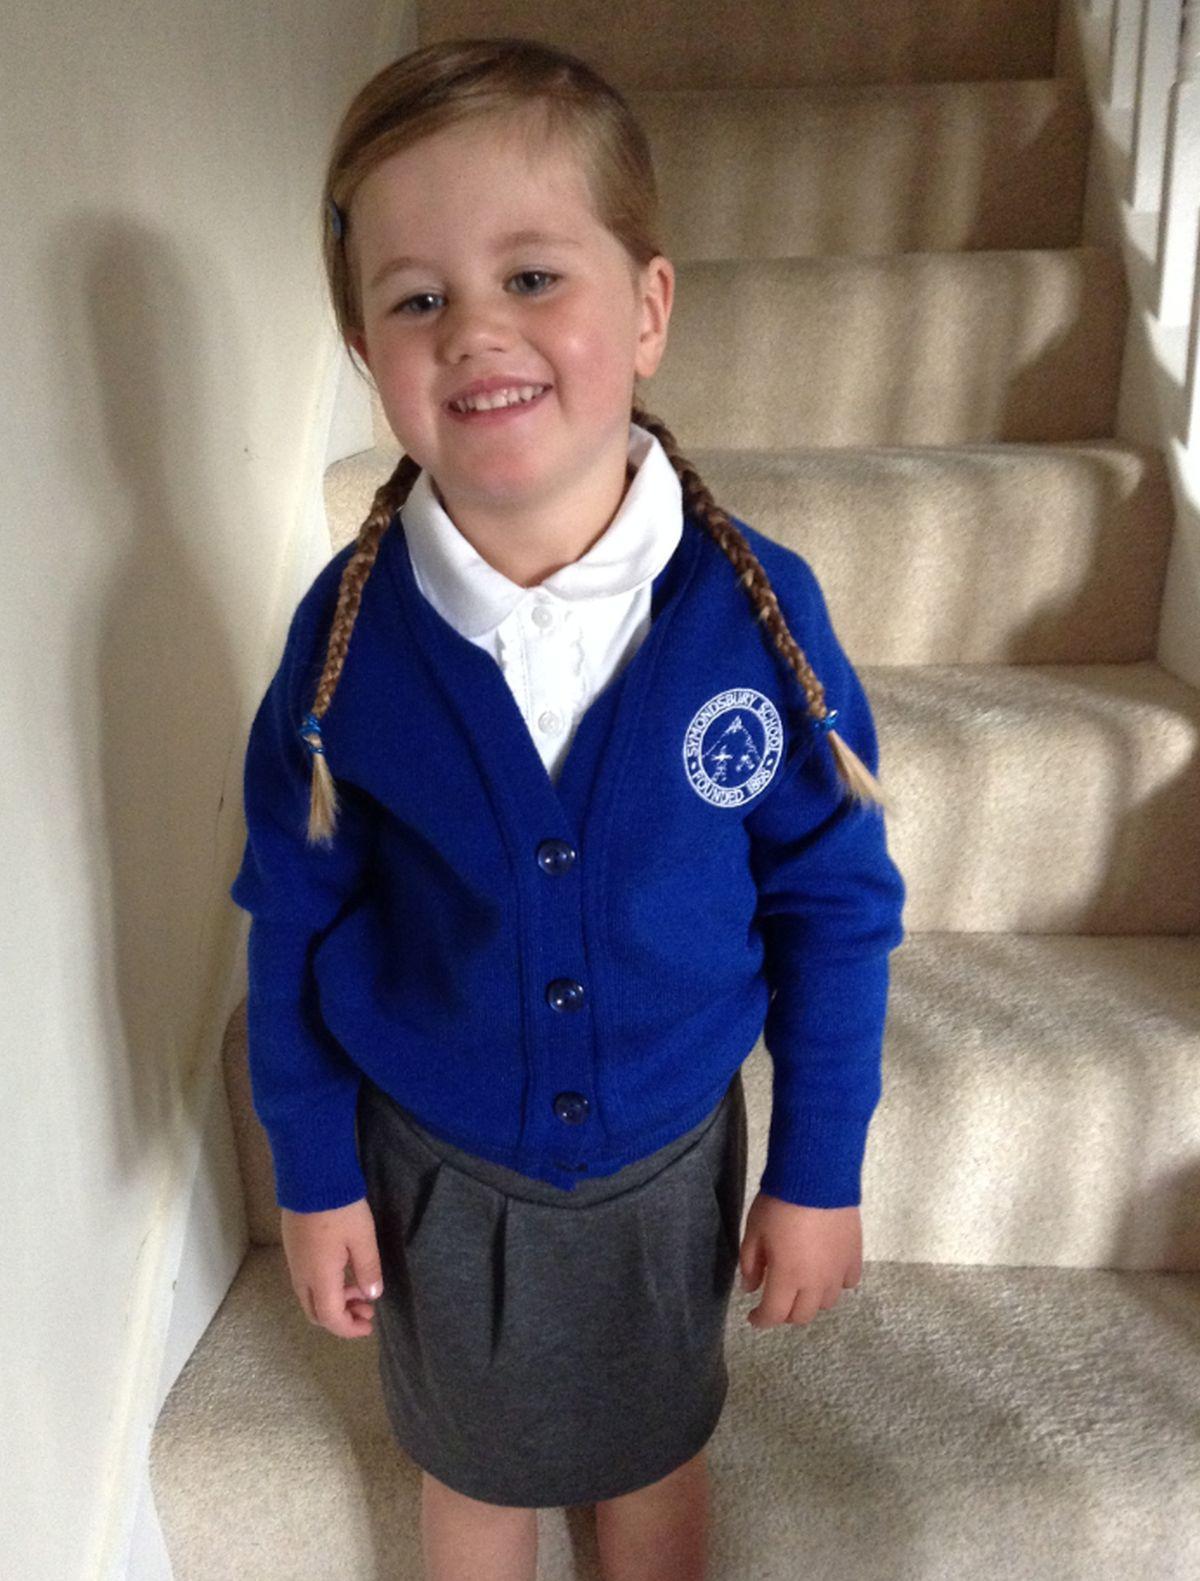 Back to School - Pixie Phillips, started her first day in Reception at Symondsbury School.
Picture by- Martin Phillips

